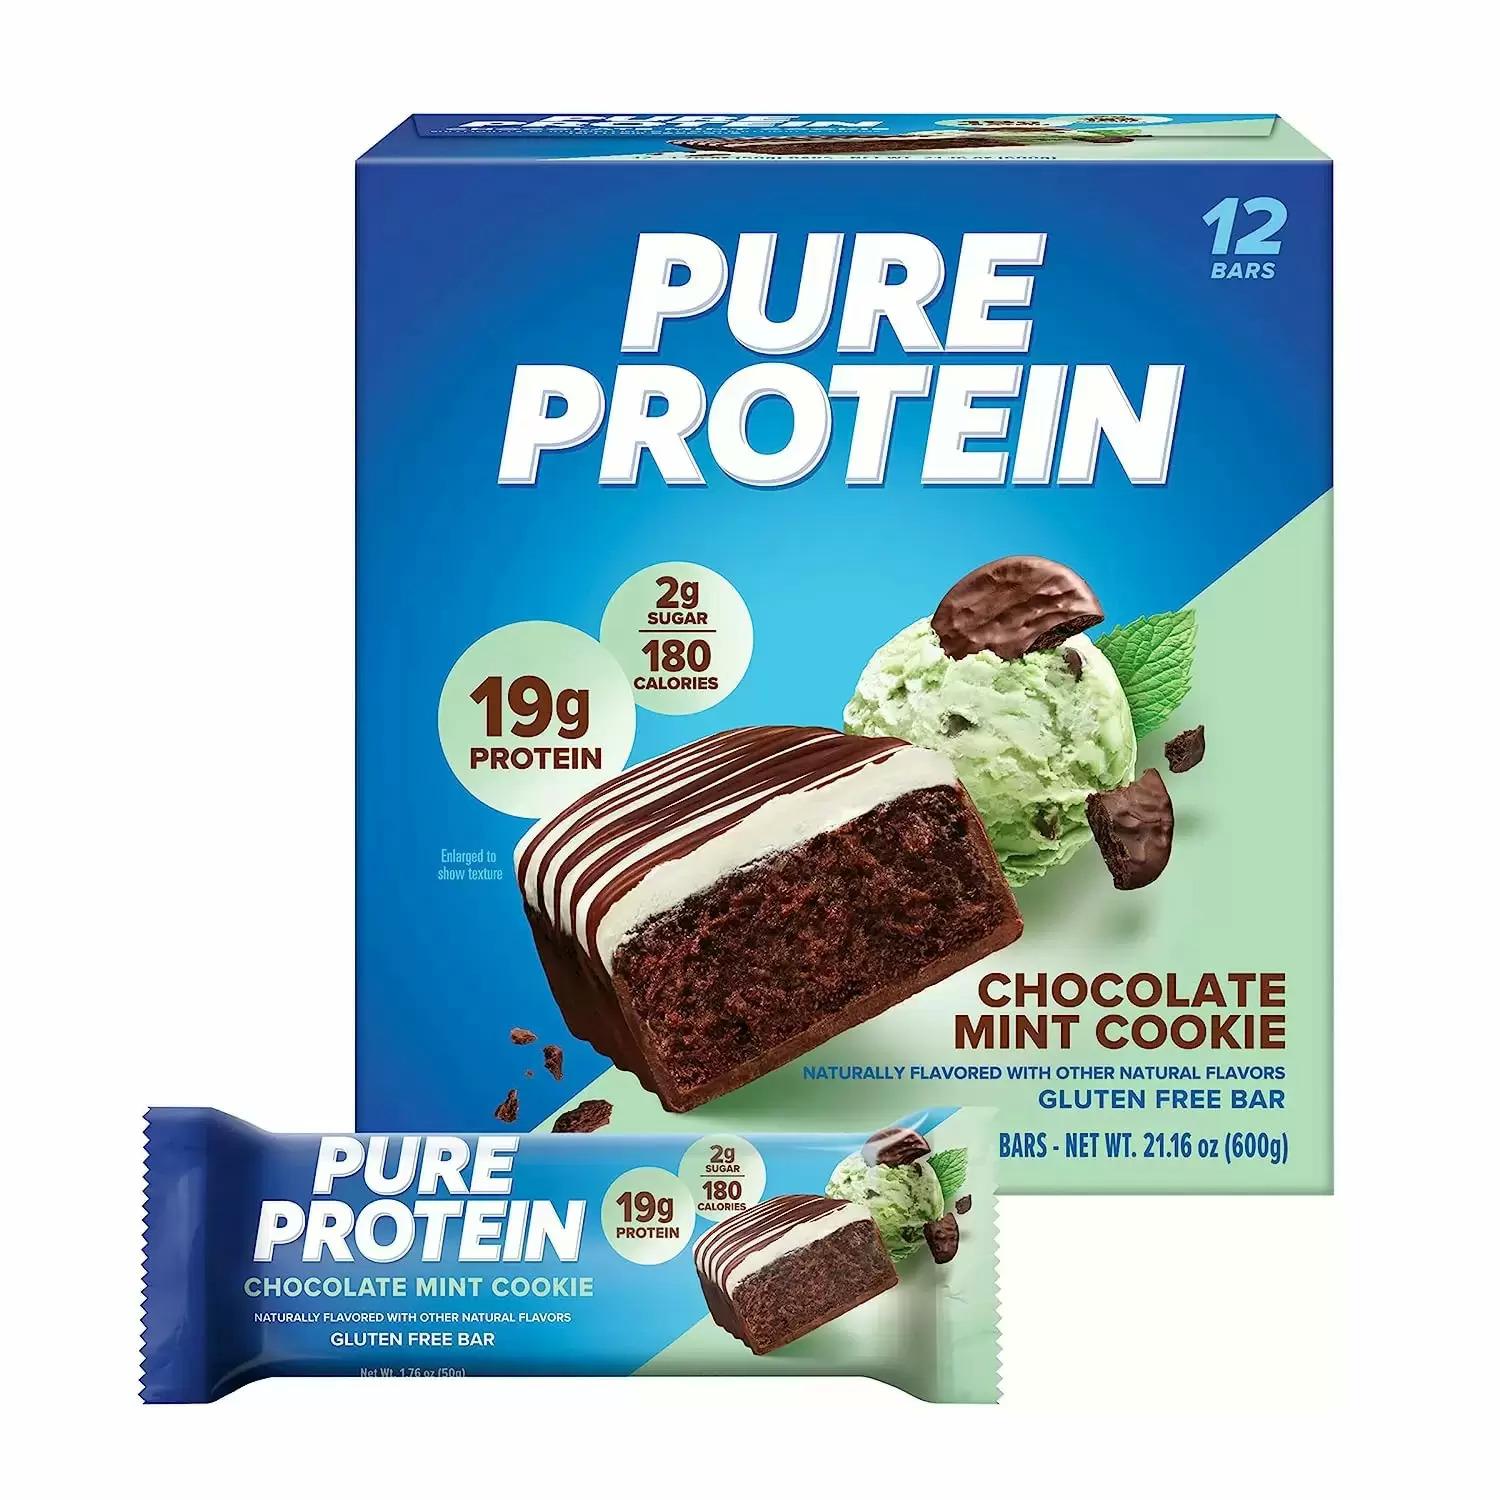 Pure Protein Bars 12 Pack for $12.70 Shipped